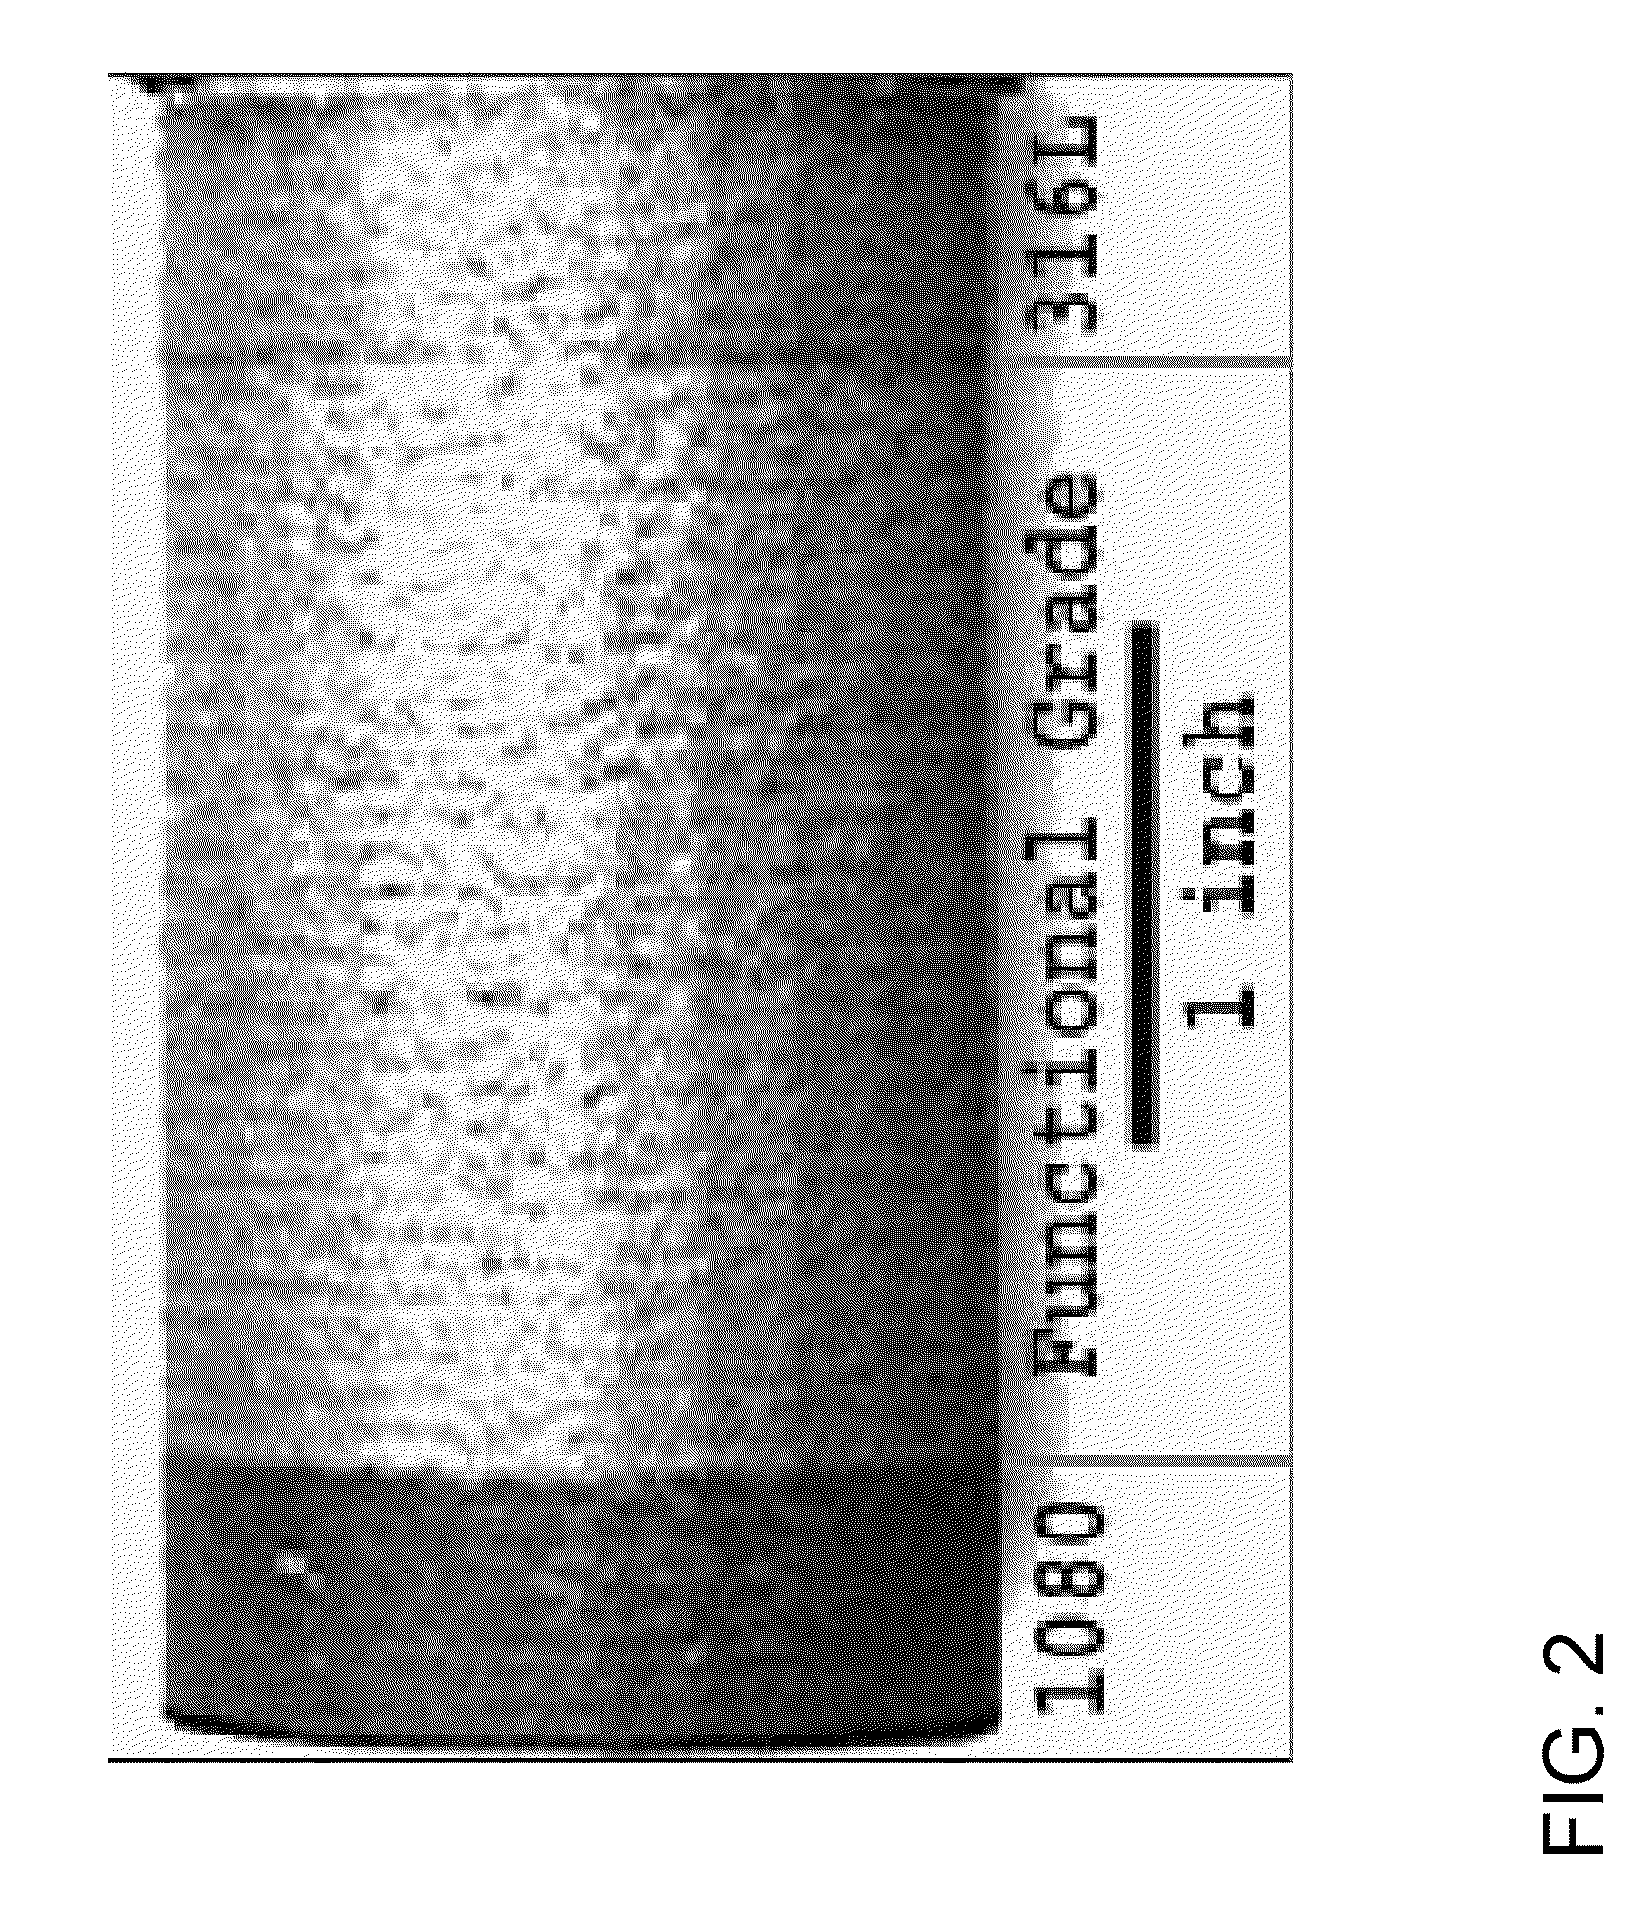 Graded transitions for joining dissimilar metals and methods of fabrication therefor